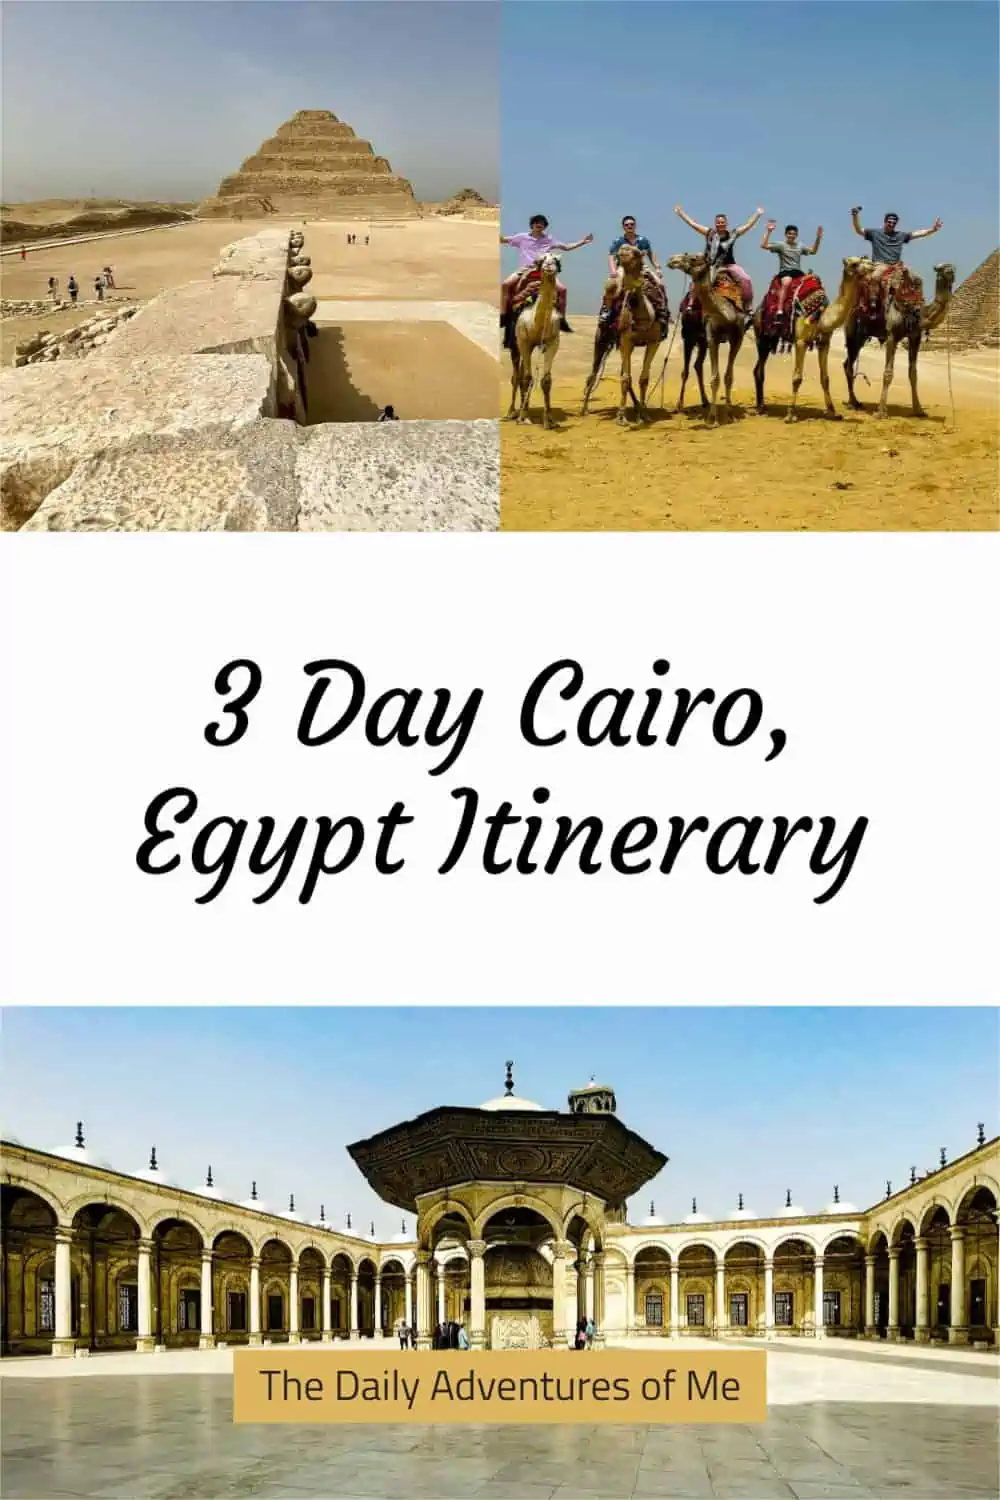 Get the most out of your time in #CairoEgypt by reading my three-day Cairo itinerary. #thingstodoinCairo #thingstodoinCairoEgypt